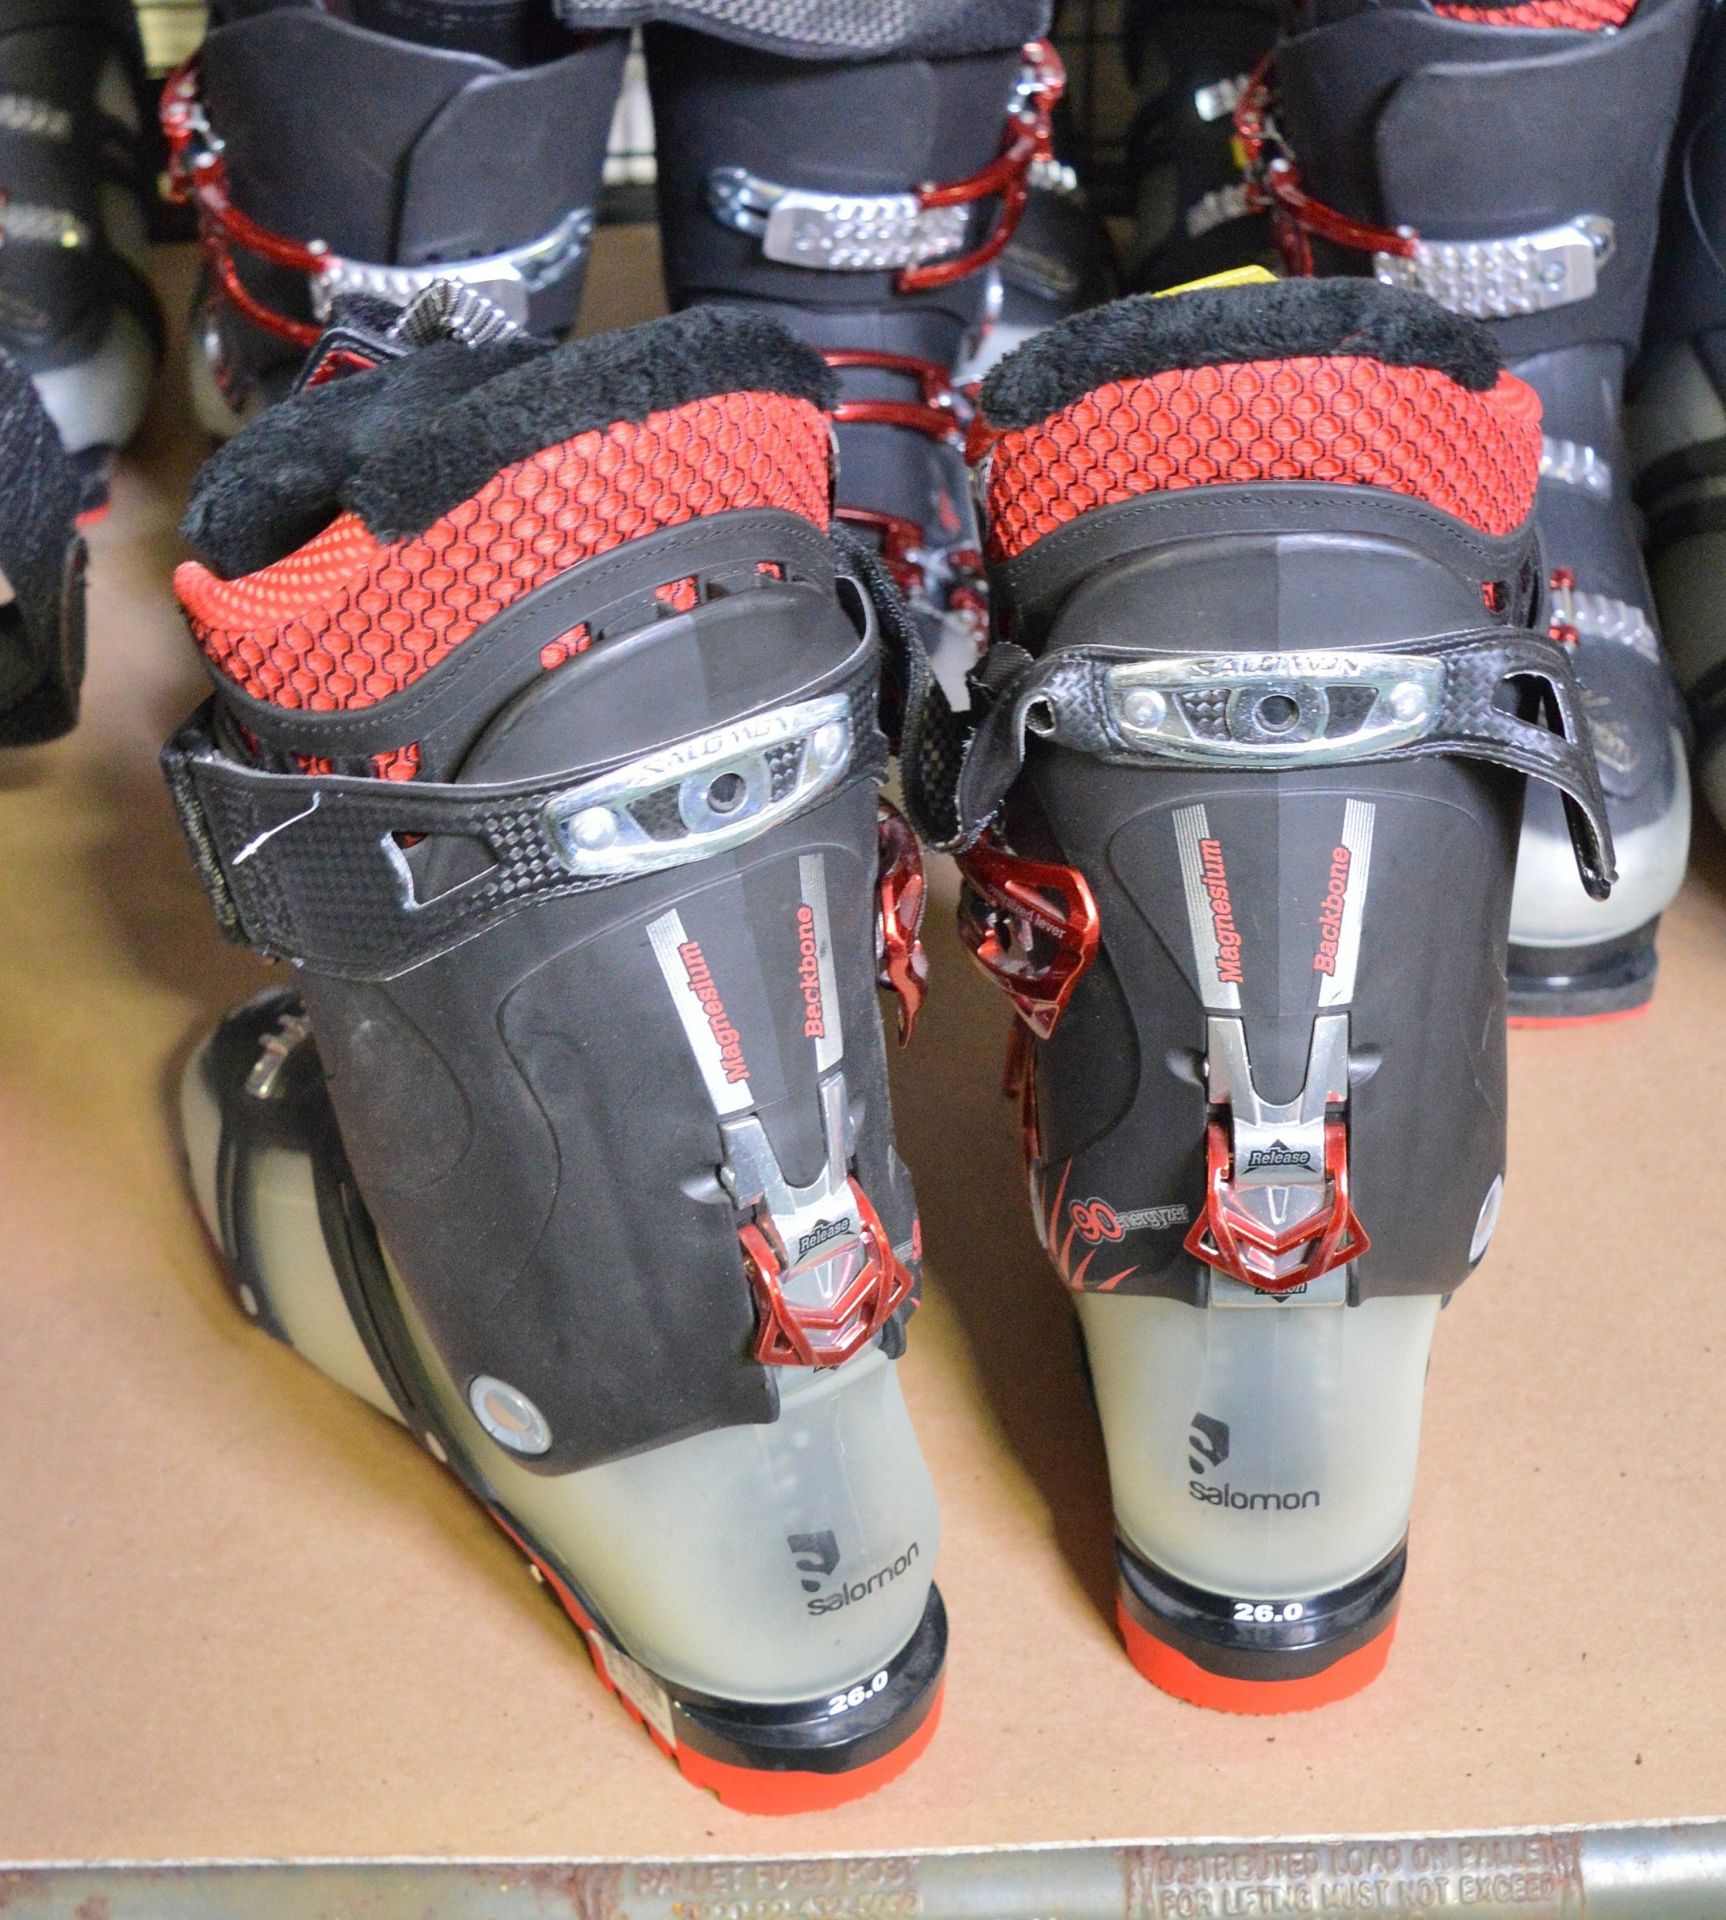 8x Pairs of Ski Boots - various makes & sizes - Image 4 of 4